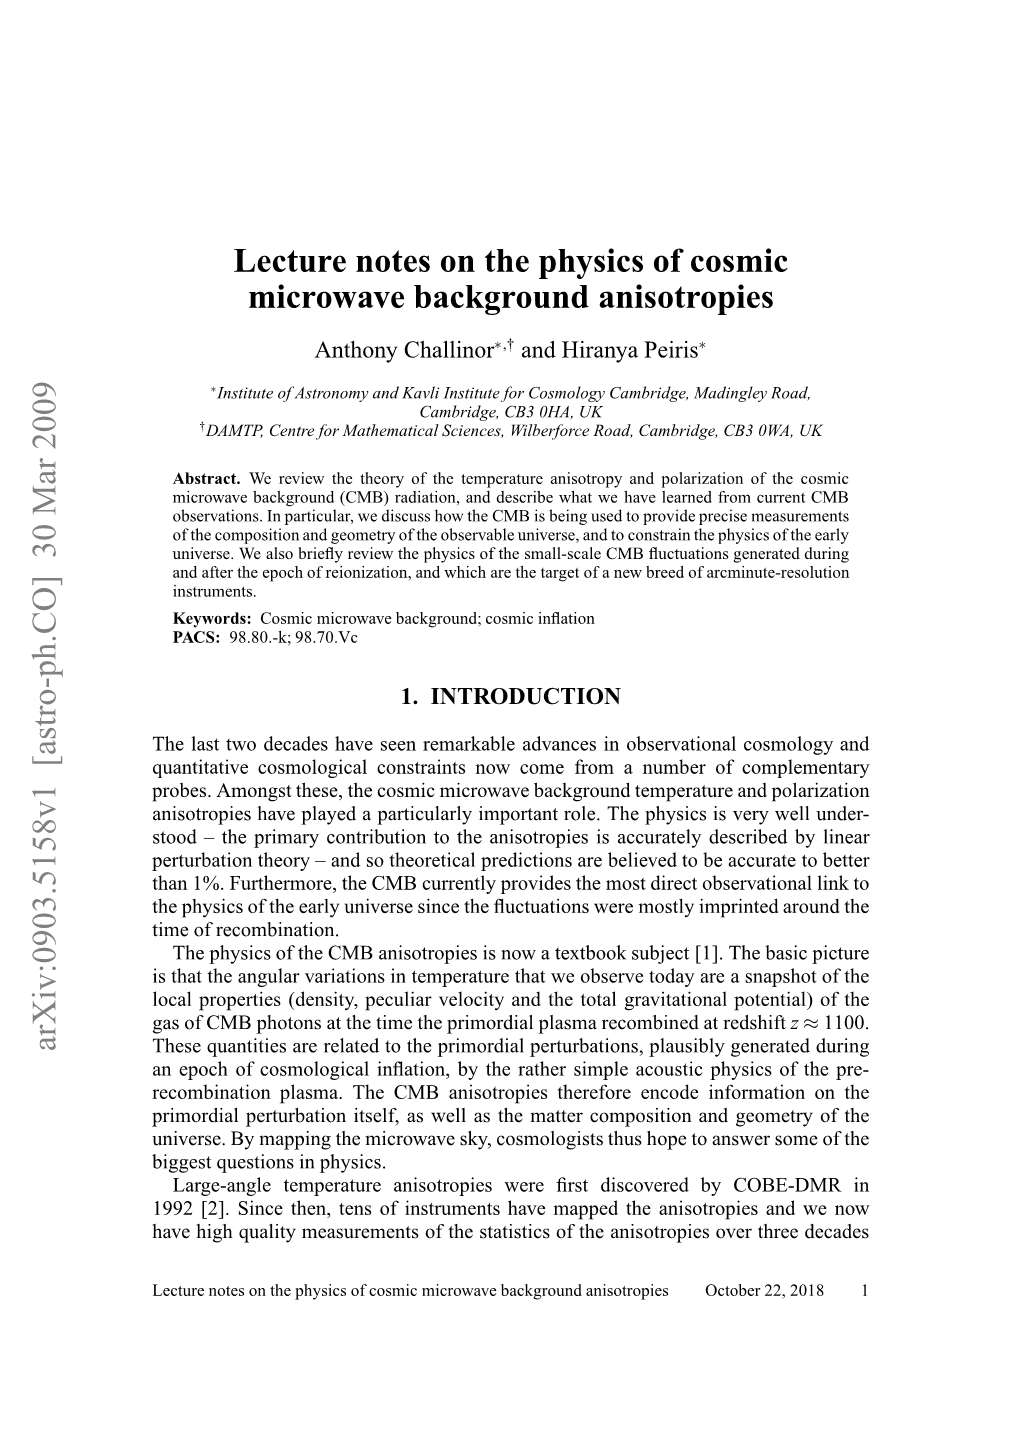 Lecture Notes on the Physics of Cosmic Microwave Background Anisotropies